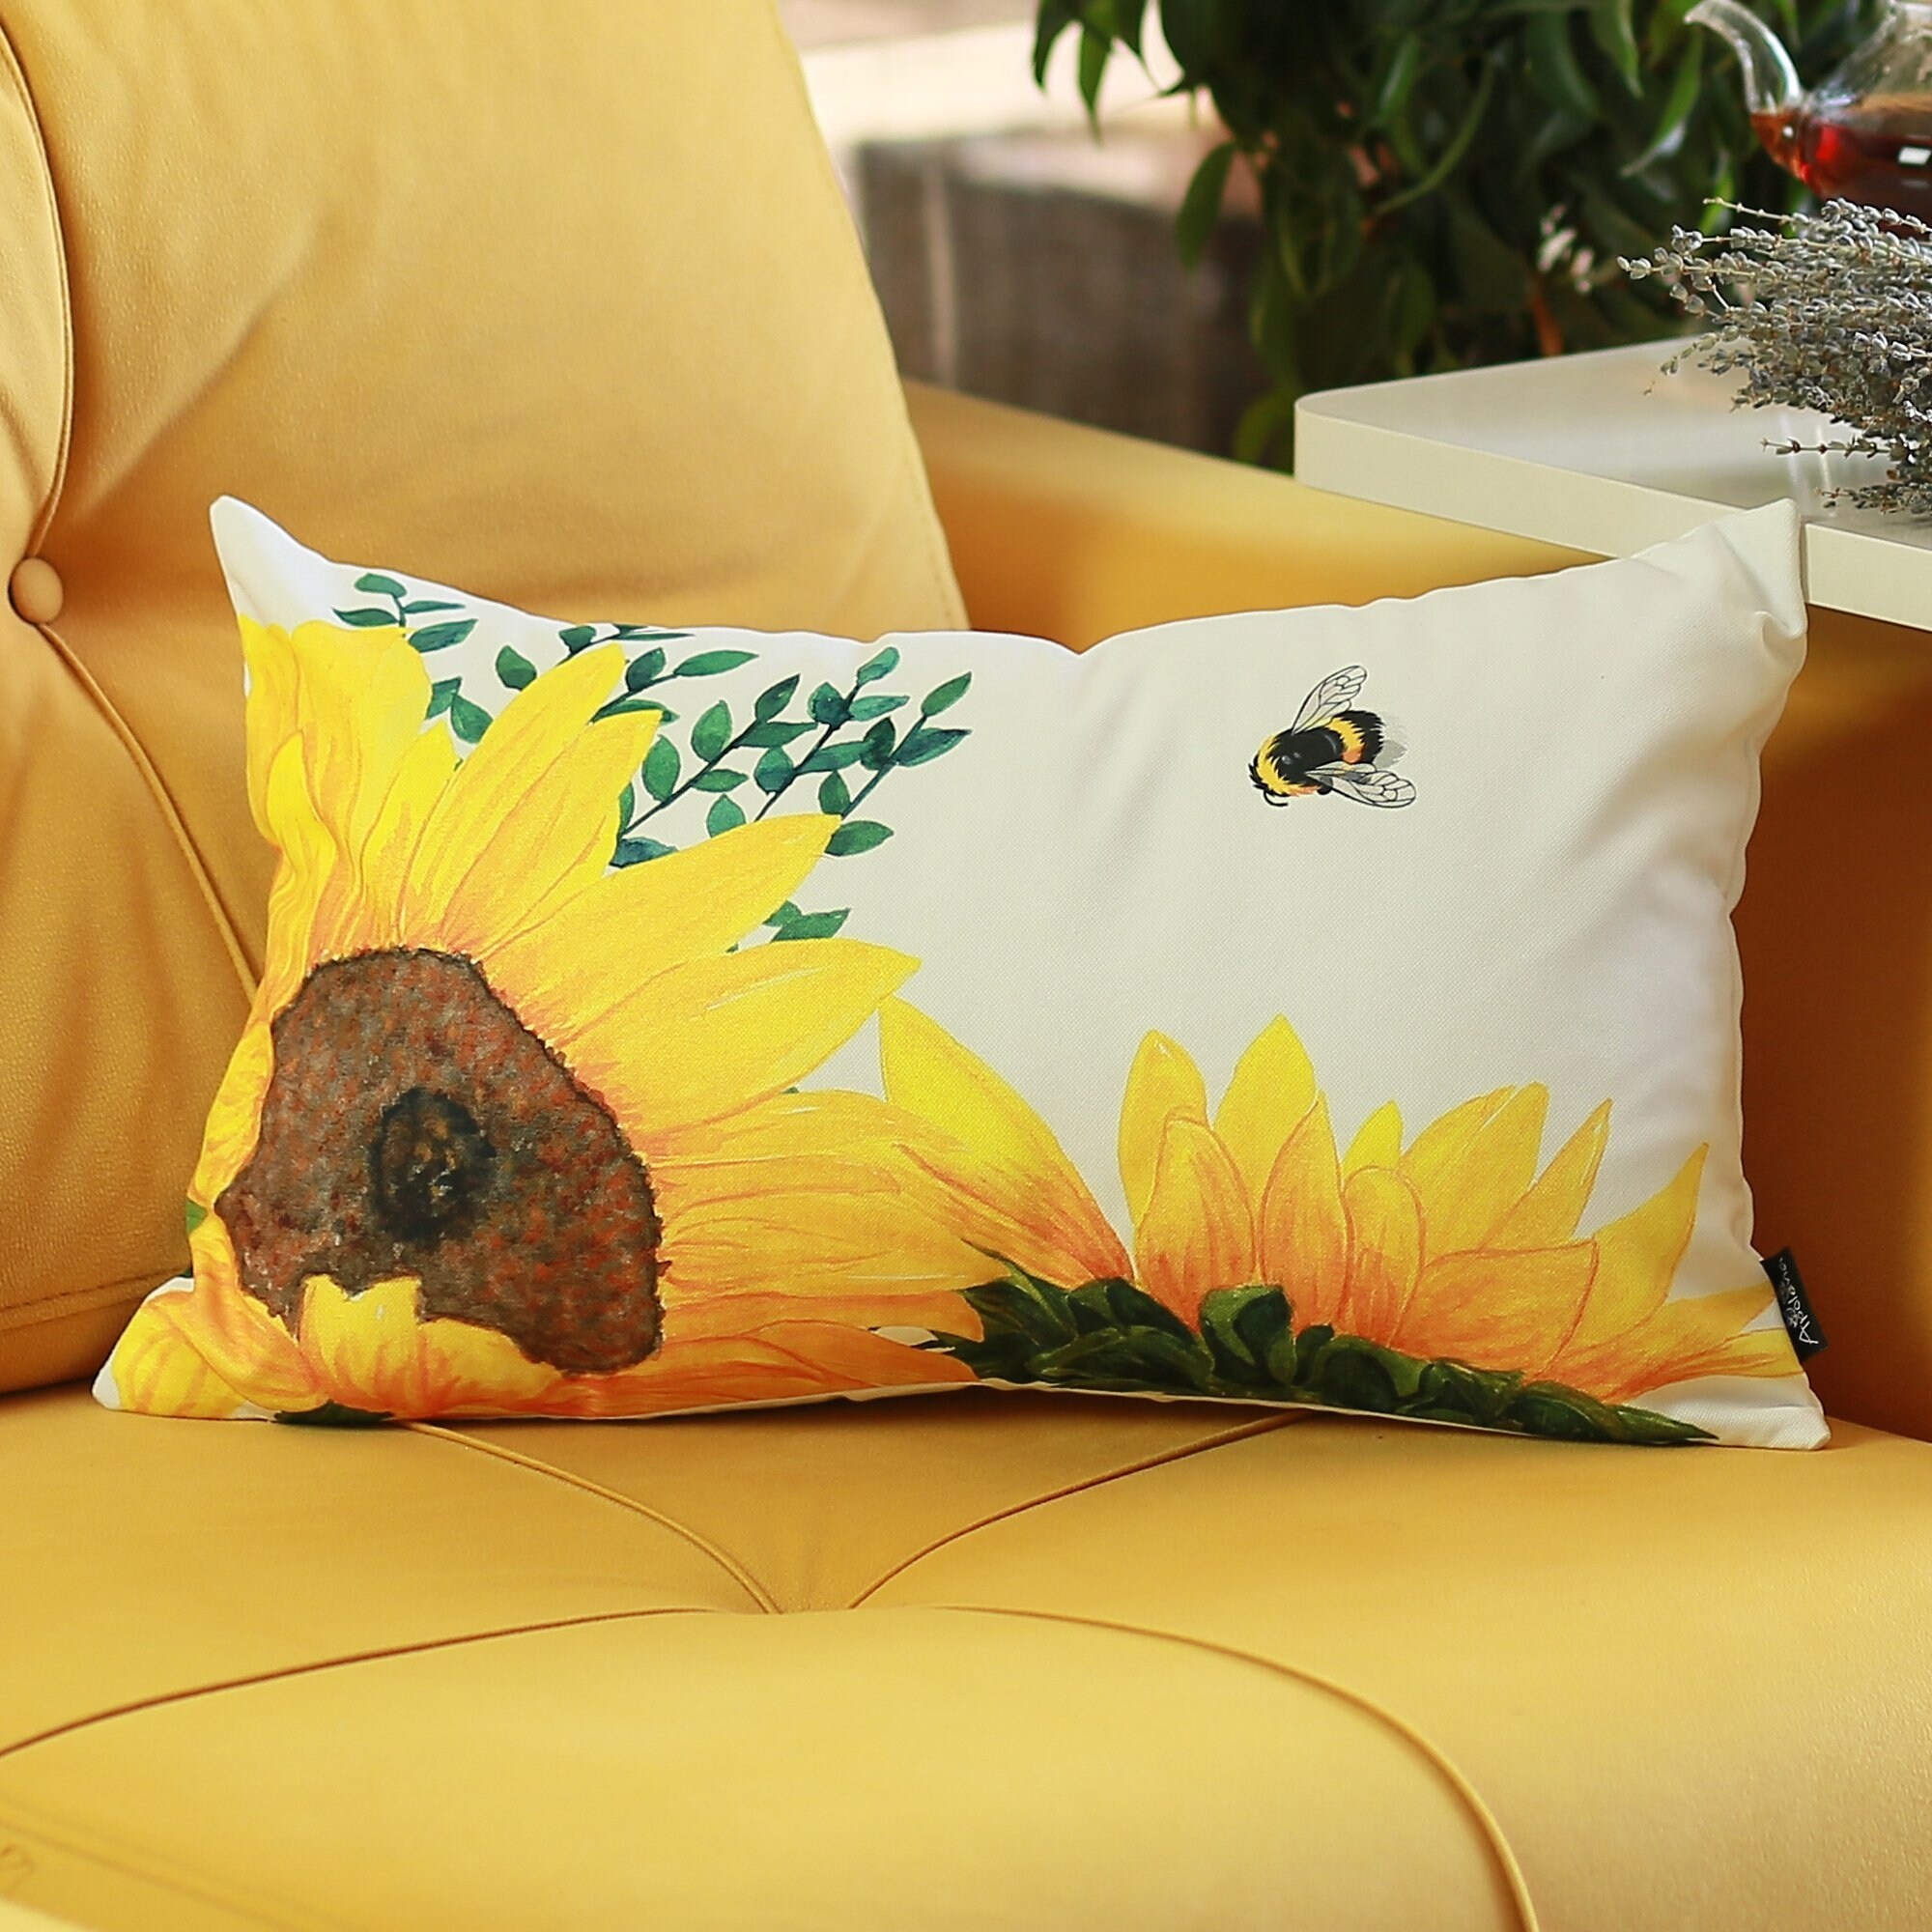 https://ak1.ostkcdn.com/images/products/is/images/direct/d86a22bc0301961f24761976c142cd6d817cbcd1/Sunflower-Bee-Decorative-Lumbar-Pillow-Covers-12%27%27x20%27%27-%28Set-of-4%29.jpg